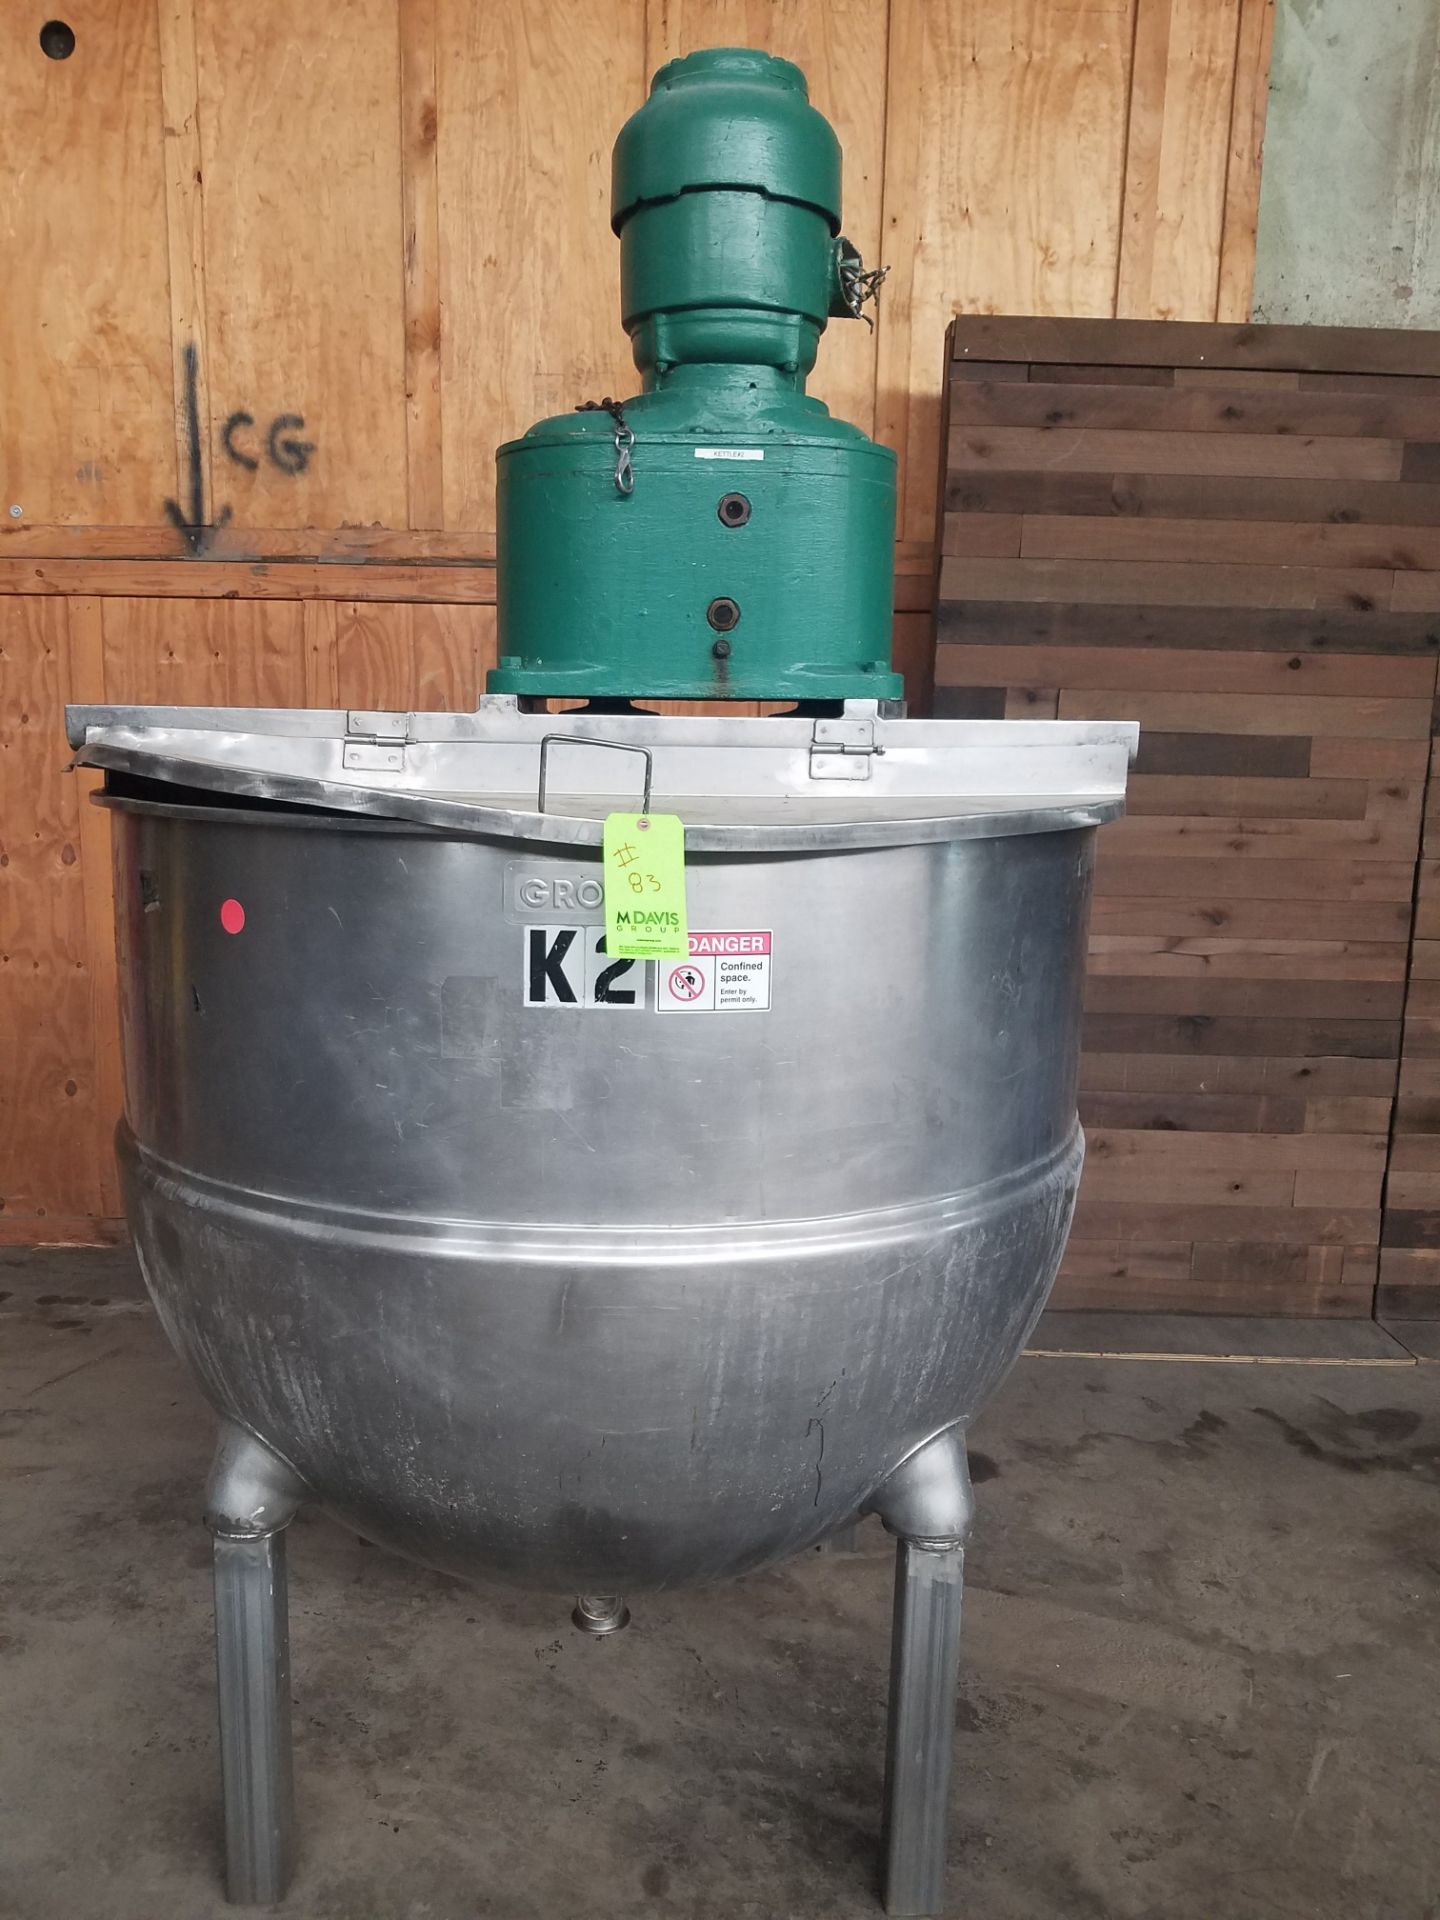 Groen TA-300 SP Stainless Steel Jacketed Kettle, Serial # 05685(Loading, Rigging & Site Management